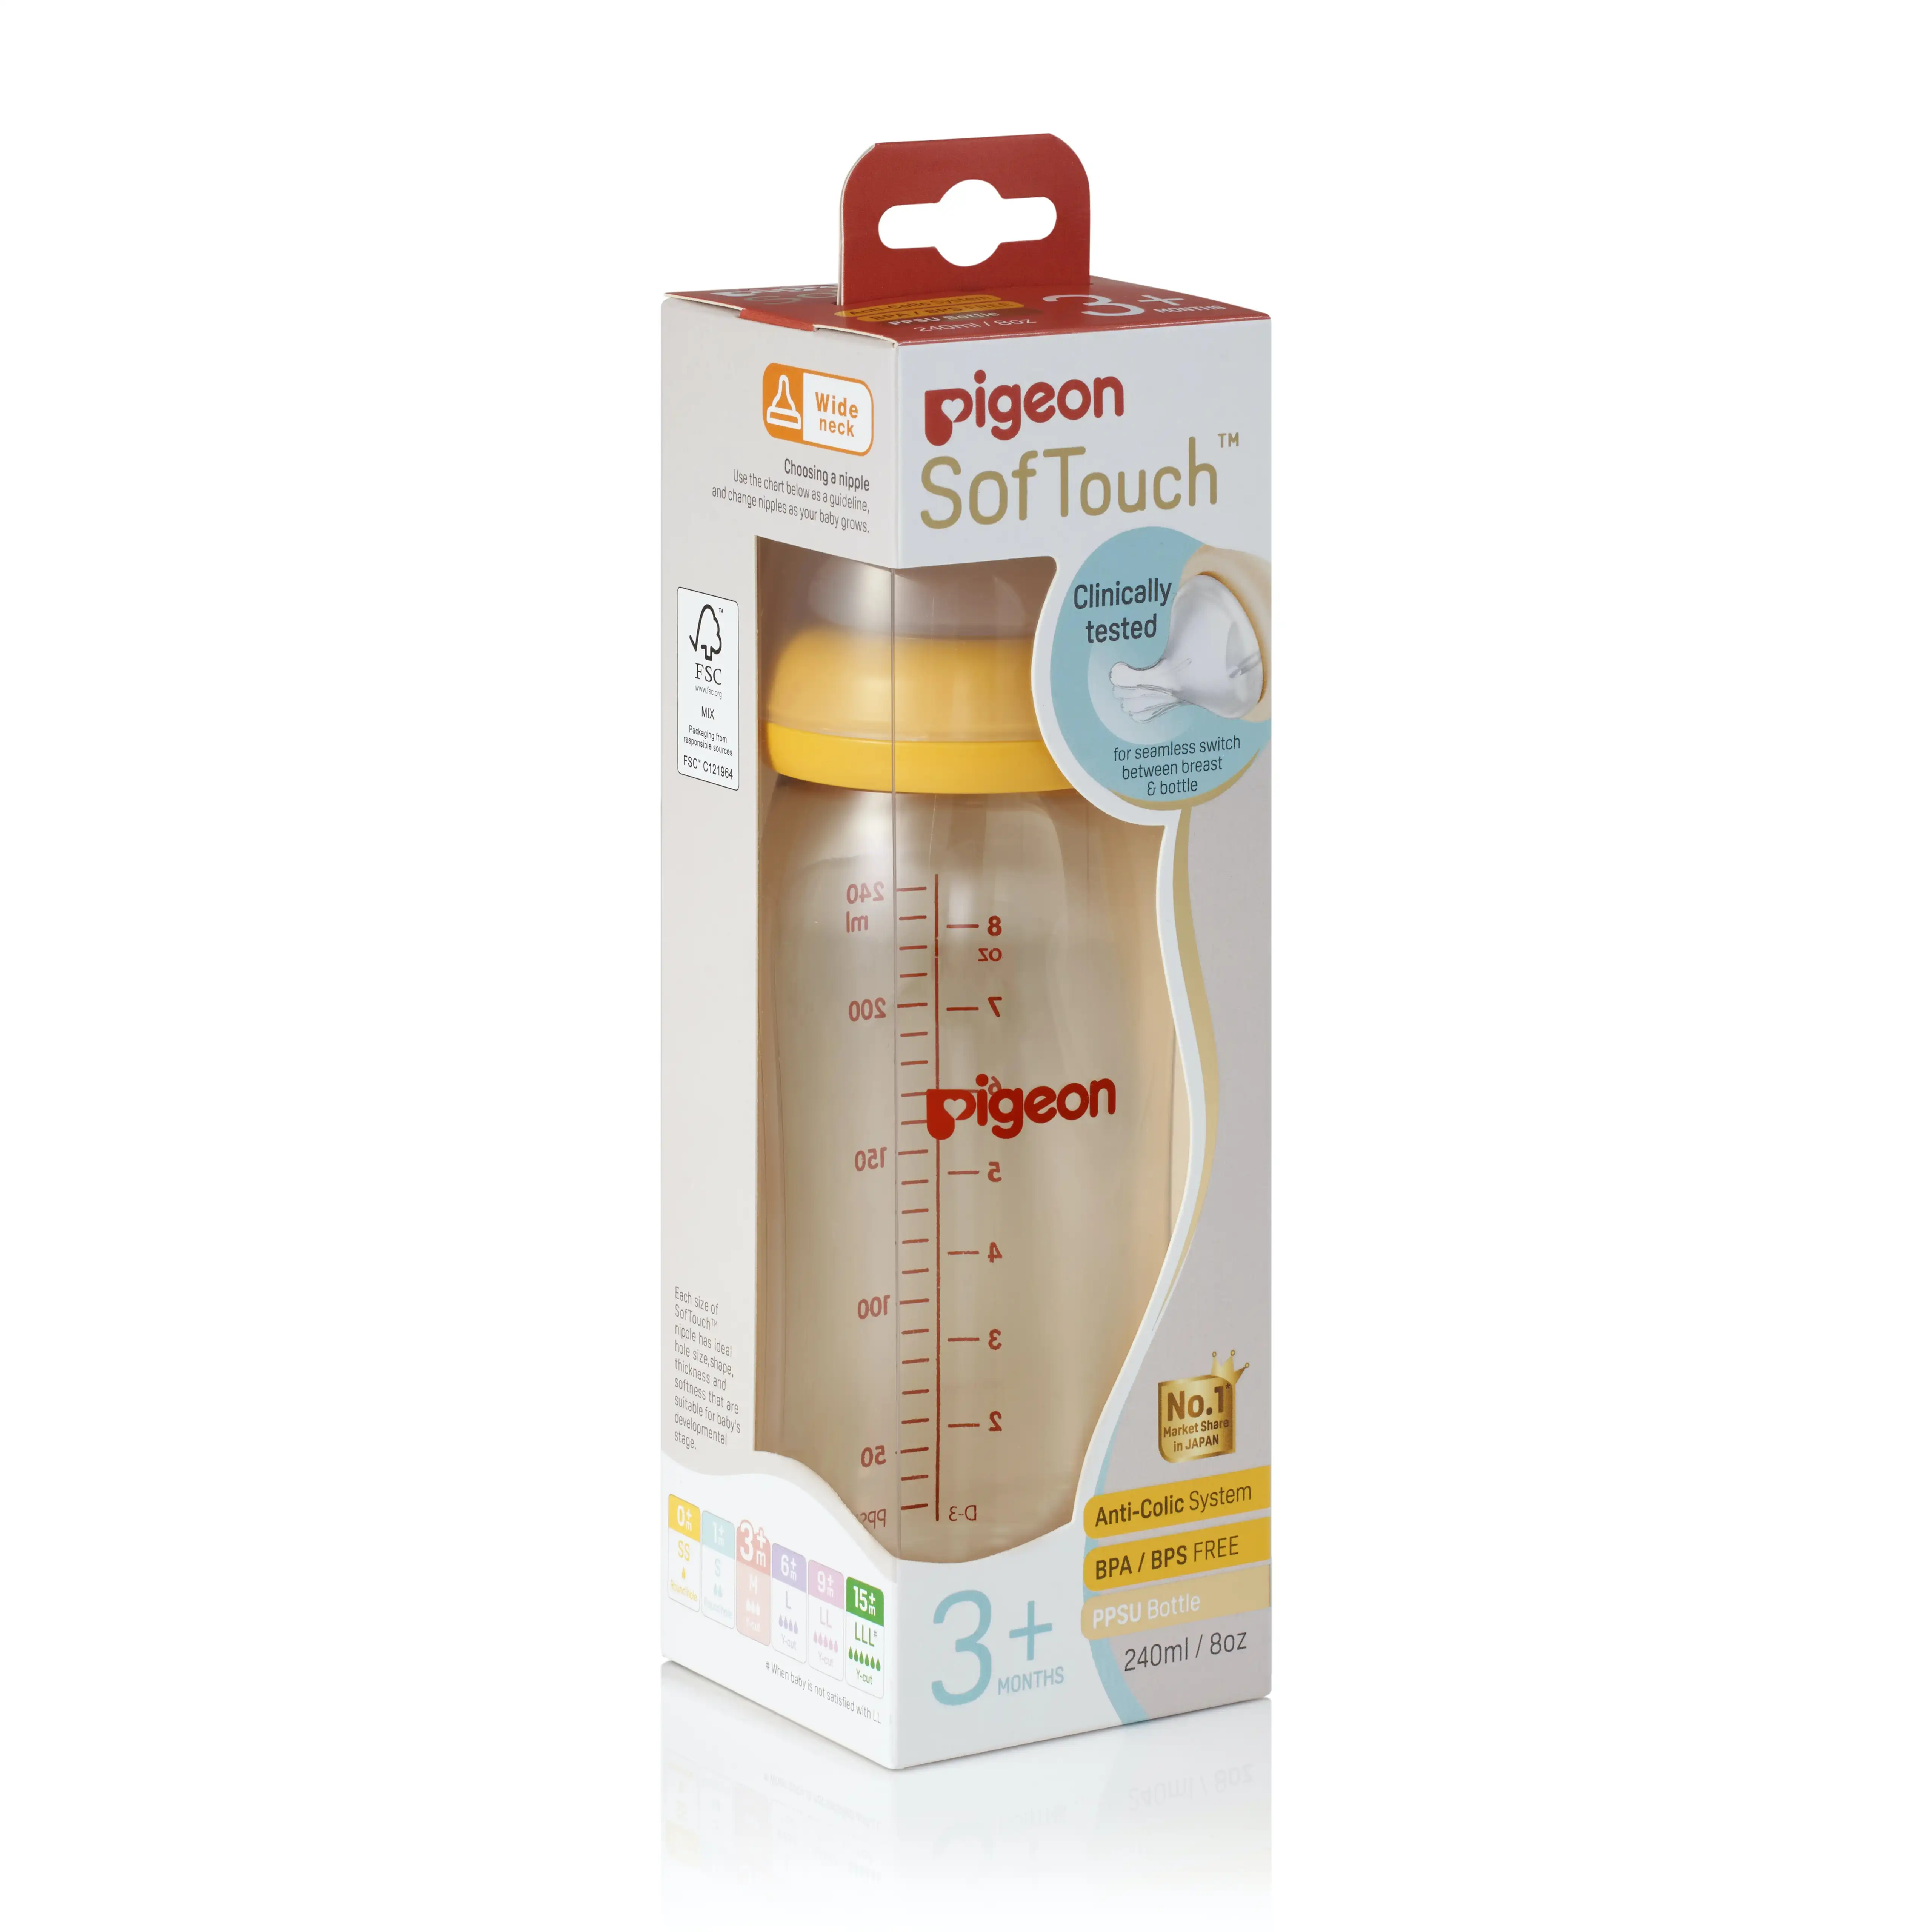 PIGEON SofTouch Bottle PPSU 240ml